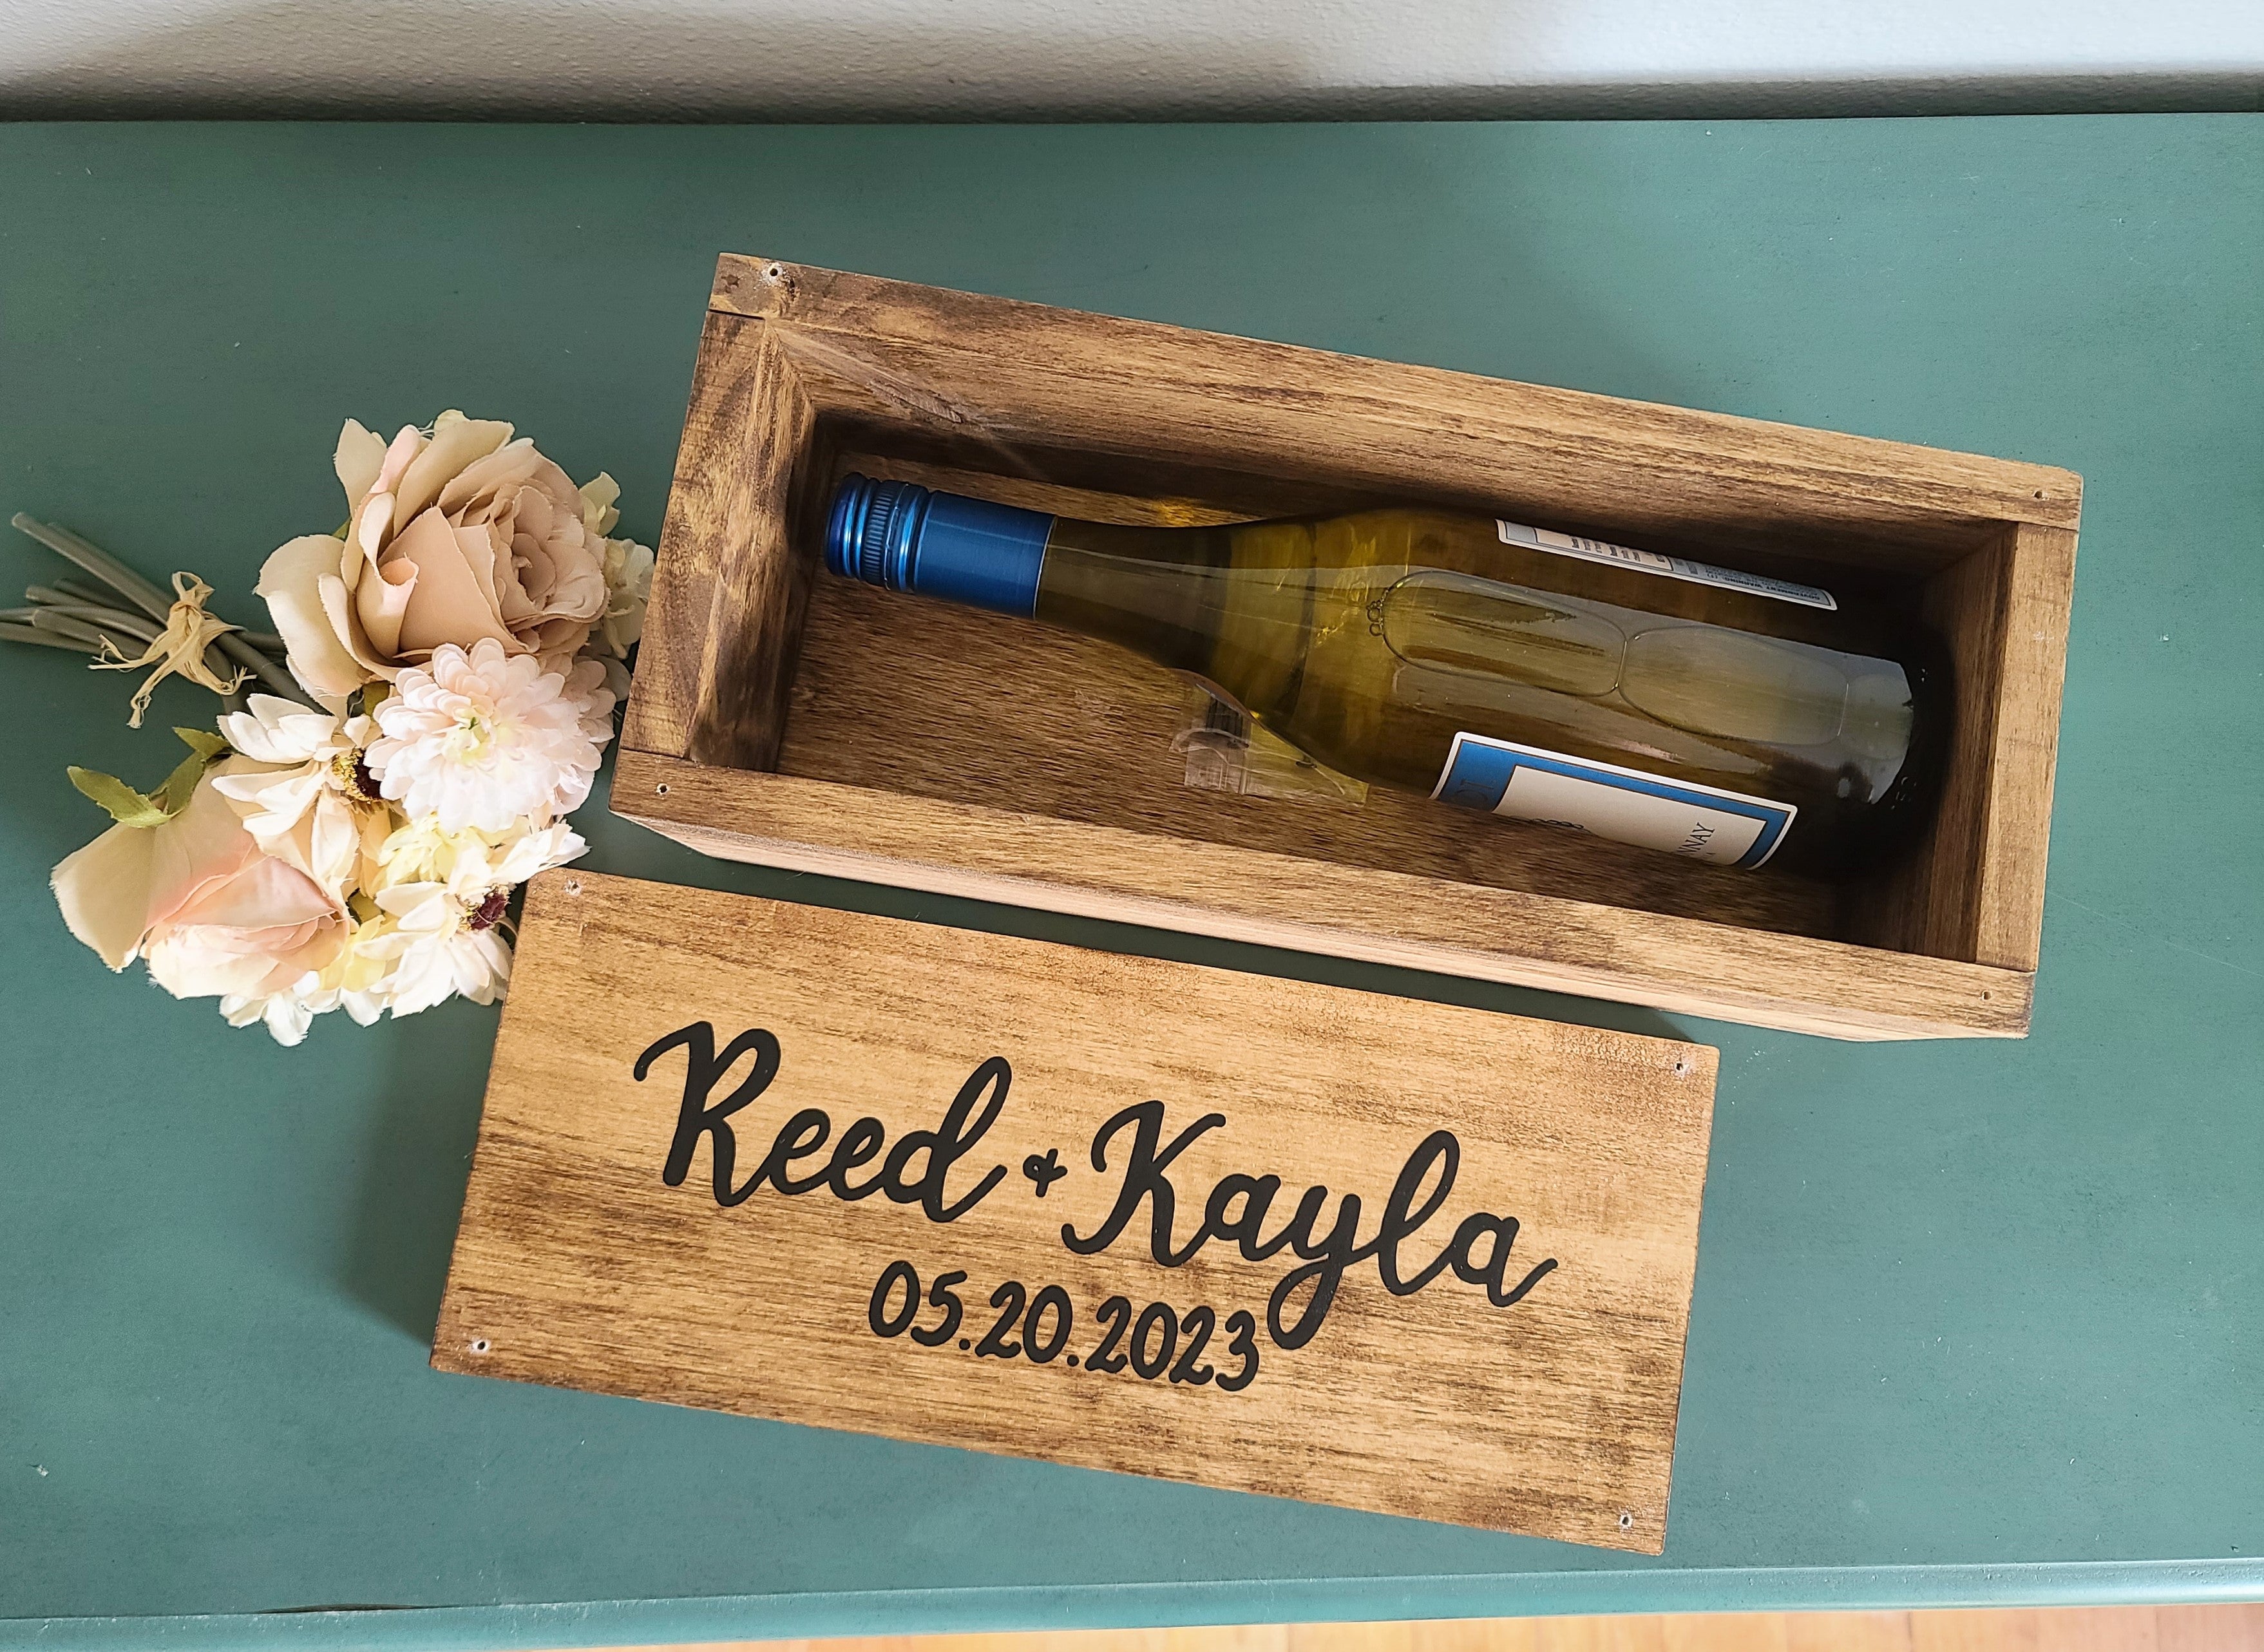 Wooden Wine Box - Time Capsule Box - Wedding Decor by Perryhill